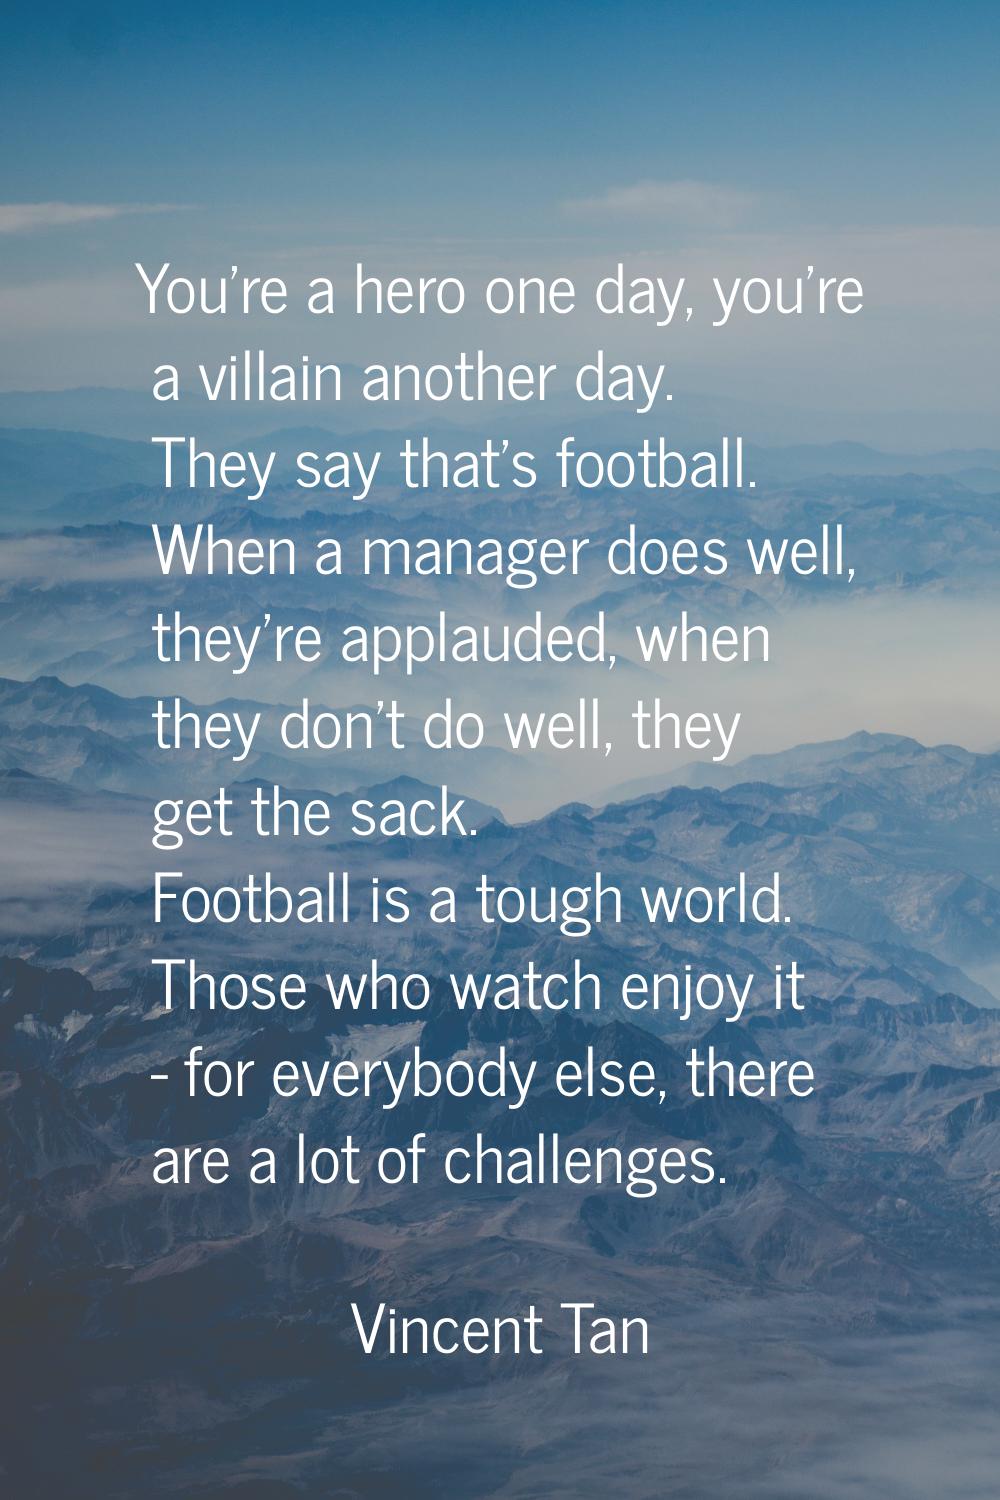 You're a hero one day, you're a villain another day. They say that's football. When a manager does 